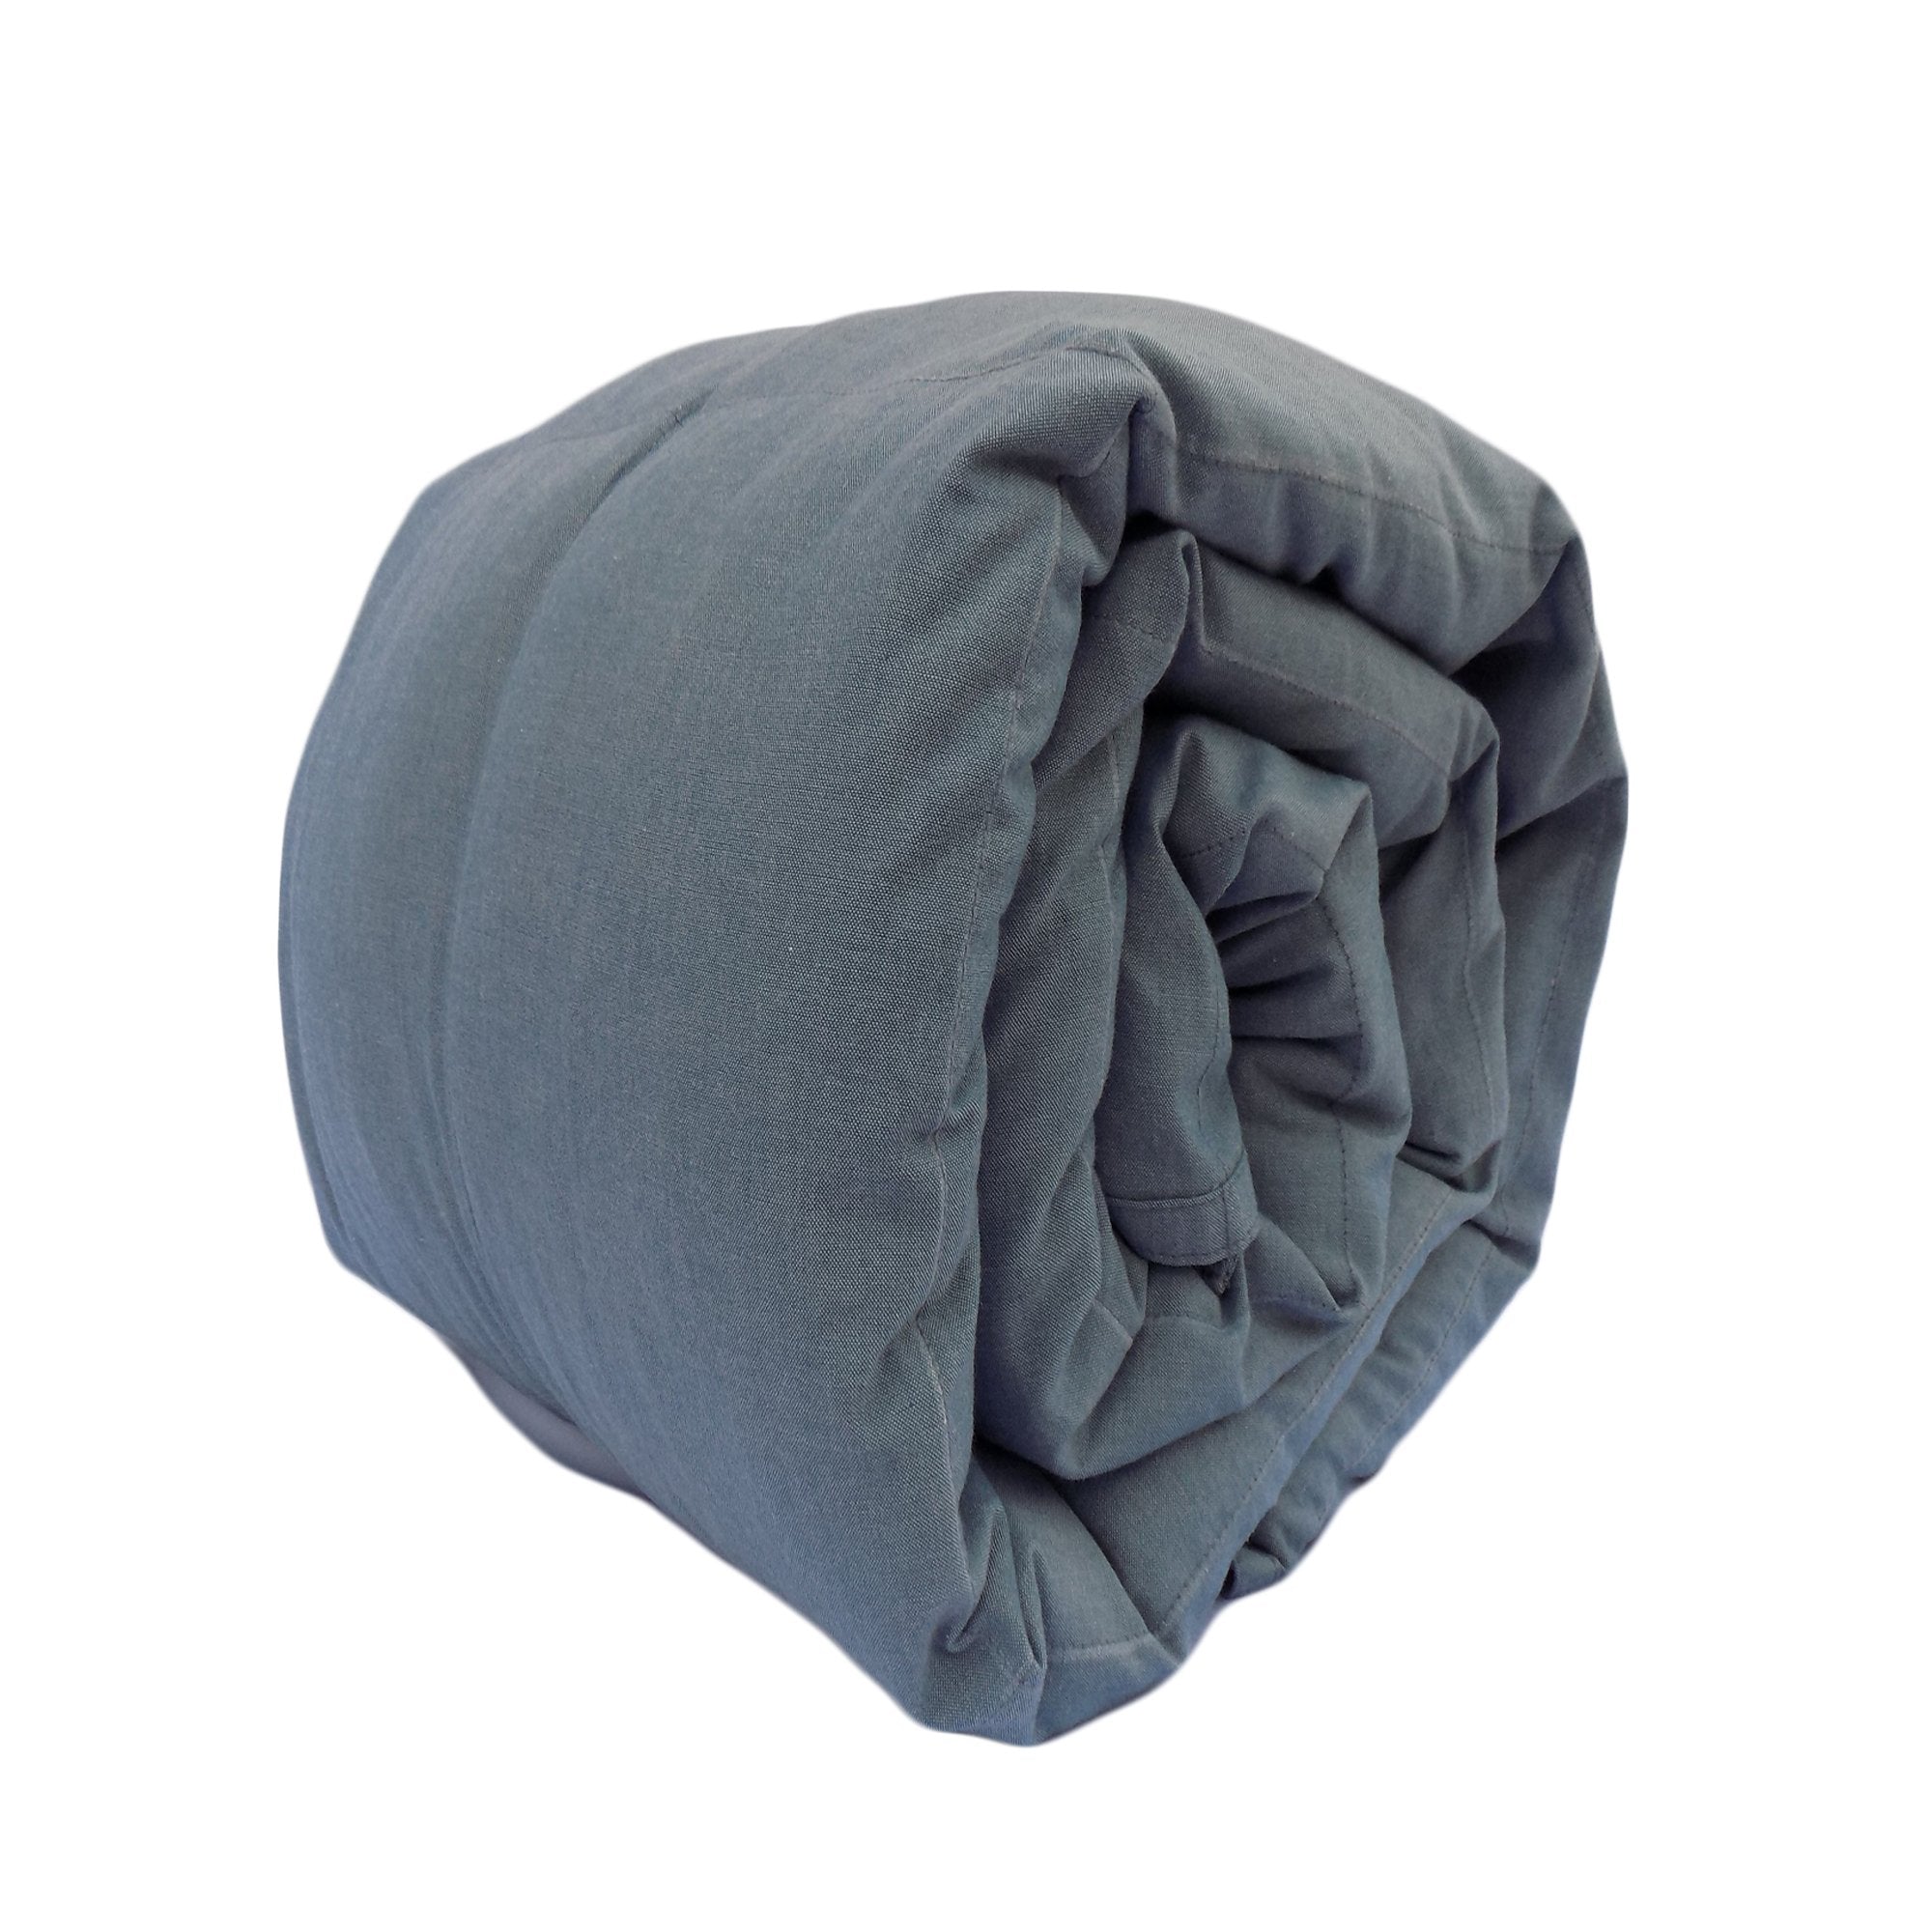 Image of Comfy Chambray Weighted Blanket